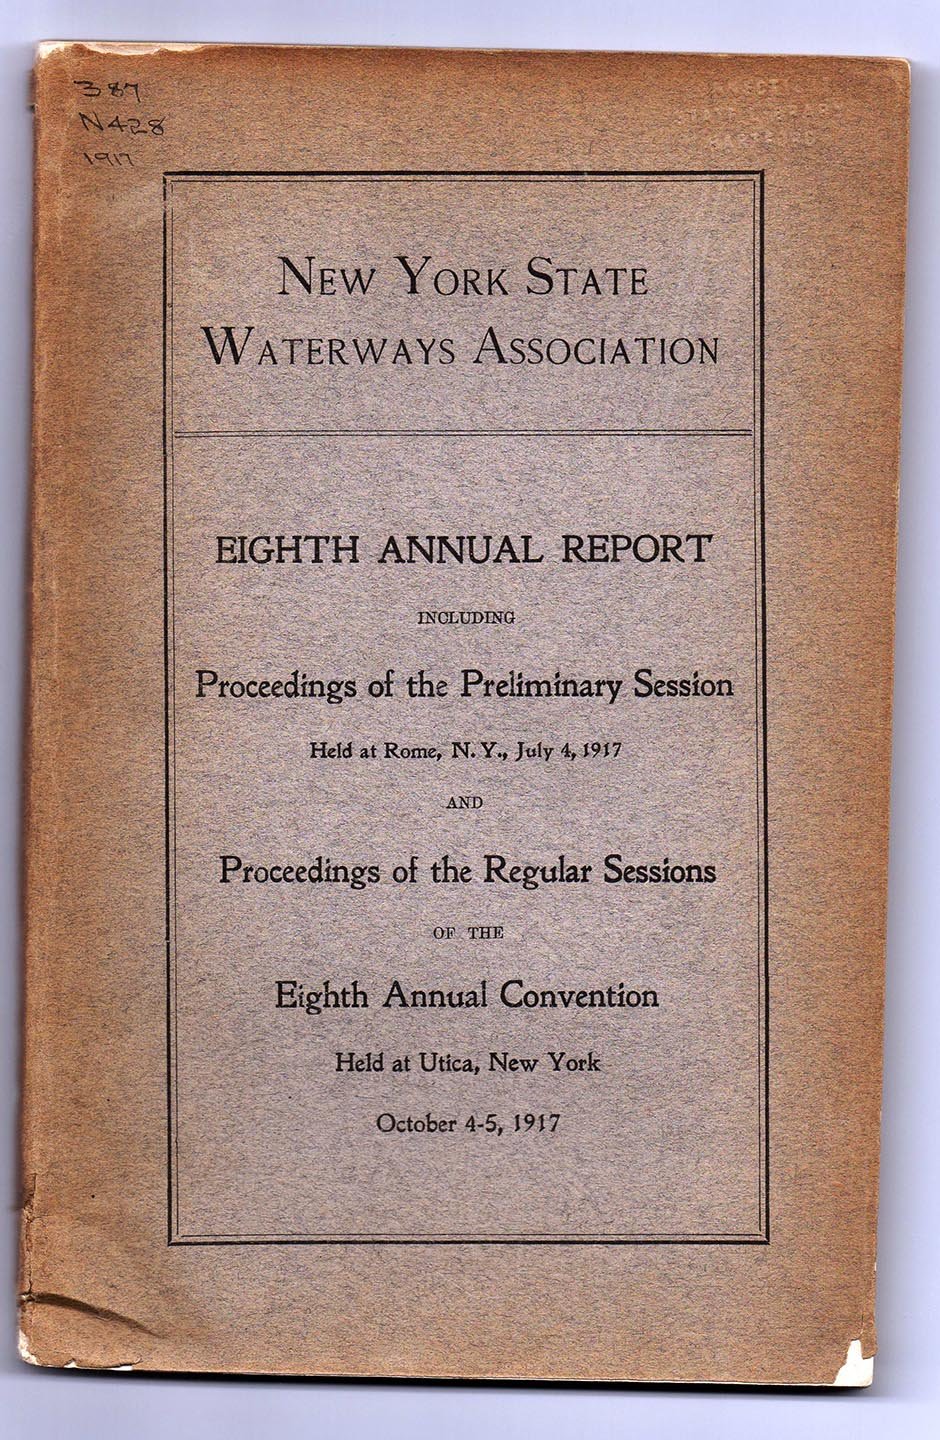 New York State Waterways Association Eighth Annual Report Including Proceedings of the Preliminary Session Held at Rome, July 4, 1917 and Proveedings of the Regular Sessions of the Eighth Annual Convention Held At Utica, New York October 4-5, 1917